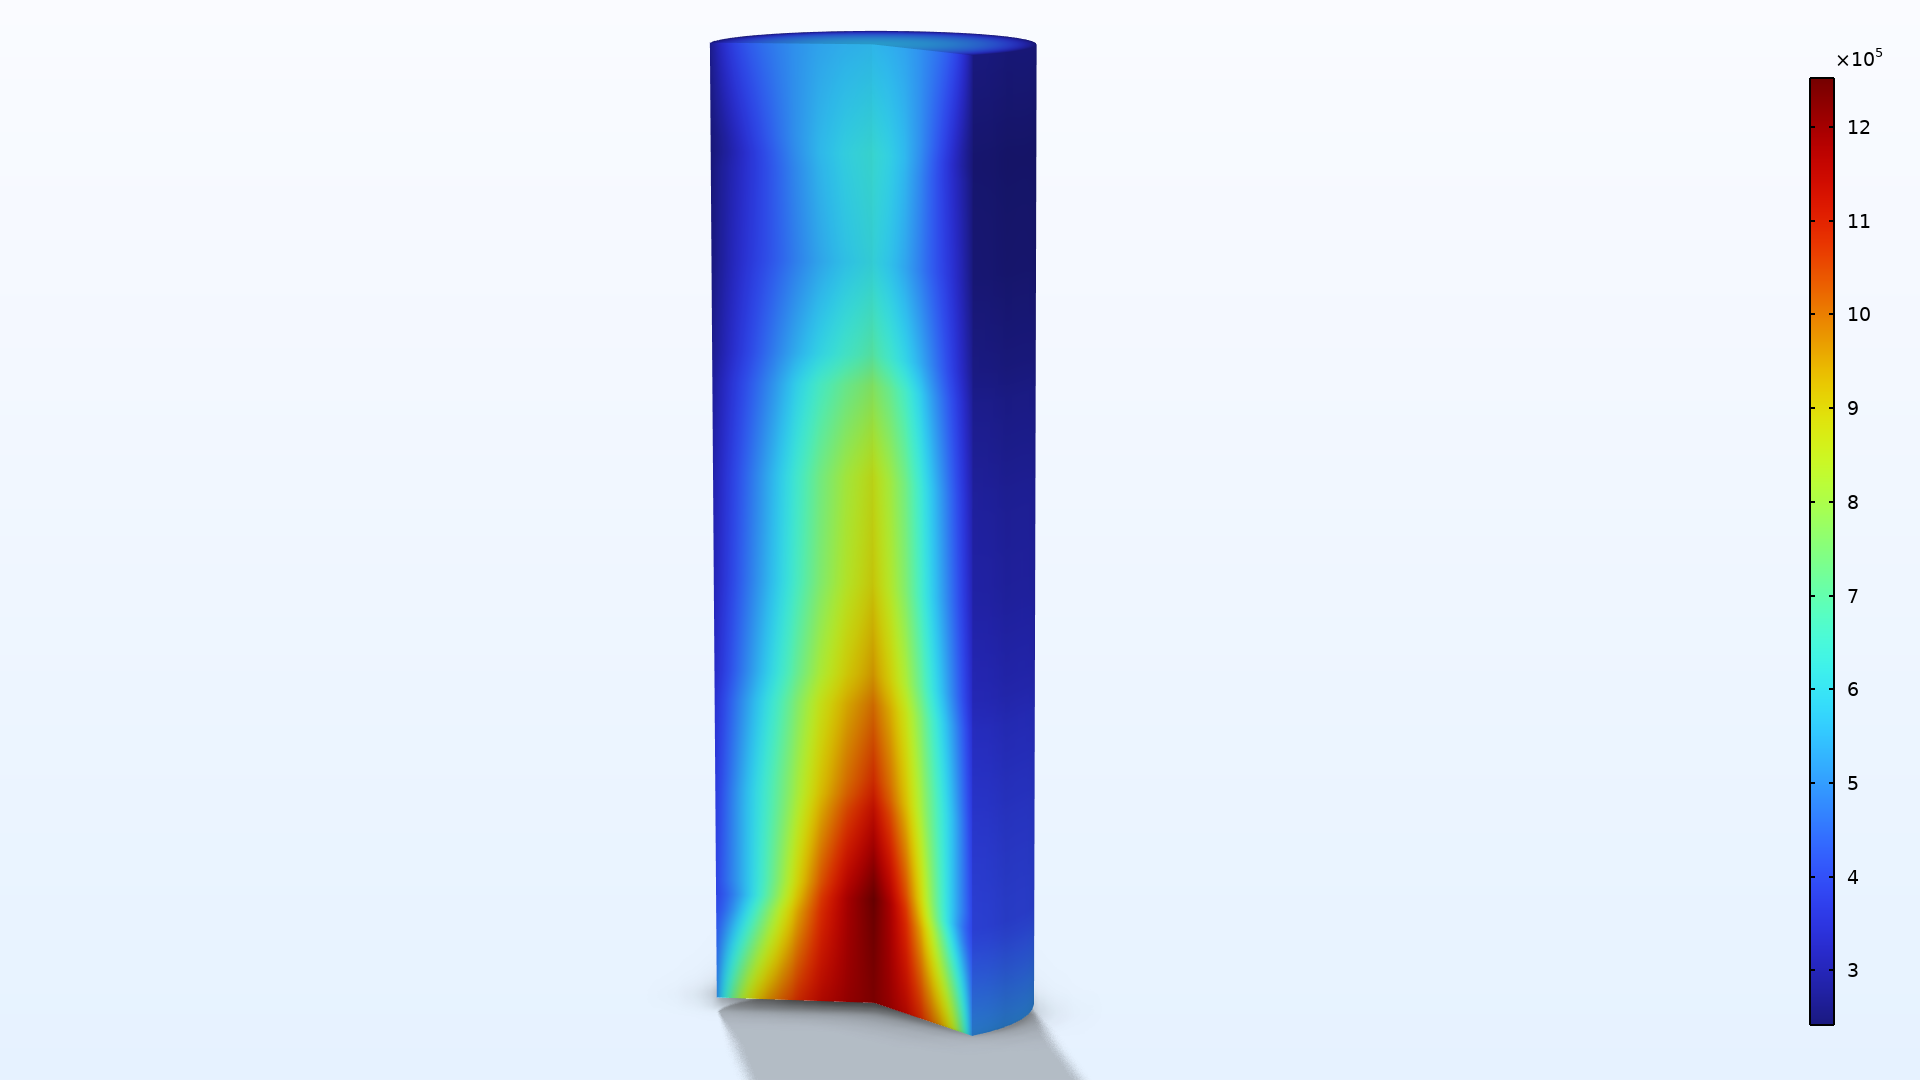 The first cylindrical furnace benchmark model showing the isotropic scattering in the Rainbow color table.